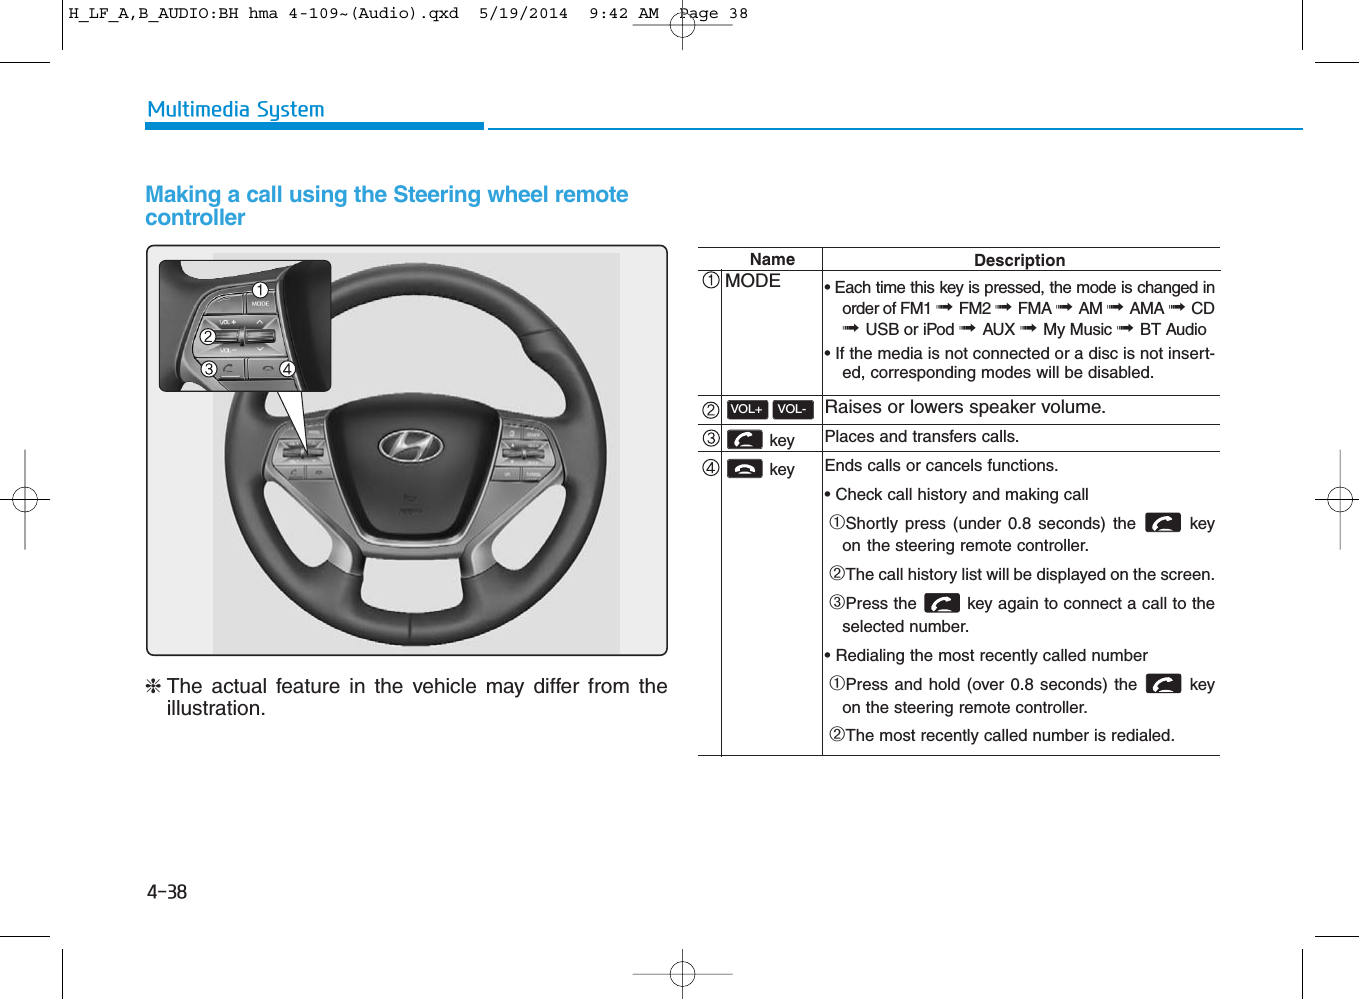 4-38Multimedia SystemMaking a call using the Steering wheel remotecontroller❈The actual feature in the vehicle may differ from theillustration.NameMODE key key VOL-VOL+Description• Each time this key is pressed, the mode is changed inorder of FM1 ➟ FM2 ➟ FMA ➟ AM ➟ AMA ➟ CD➟ USB or iPod ➟ AUX ➟ My Music ➟ BT Audio• If the media is not connected or a disc is not insert-ed, corresponding modes will be disabled.Raises or lowers speaker volume.Places and transfers calls.Ends calls or cancels functions.• Check call history and making call➀Shortly press (under 0.8 seconds) the  keyon the steering remote controller.➁The call history list will be displayed on the screen.➂Press the  key again to connect a call to theselected number.• Redialing the most recently called number➀Press and hold (over 0.8 seconds) the  keyon the steering remote controller.➁The most recently called number is redialed.H_LF_A,B_AUDIO:BH hma 4-109~(Audio).qxd  5/19/2014  9:42 AM  Page 38